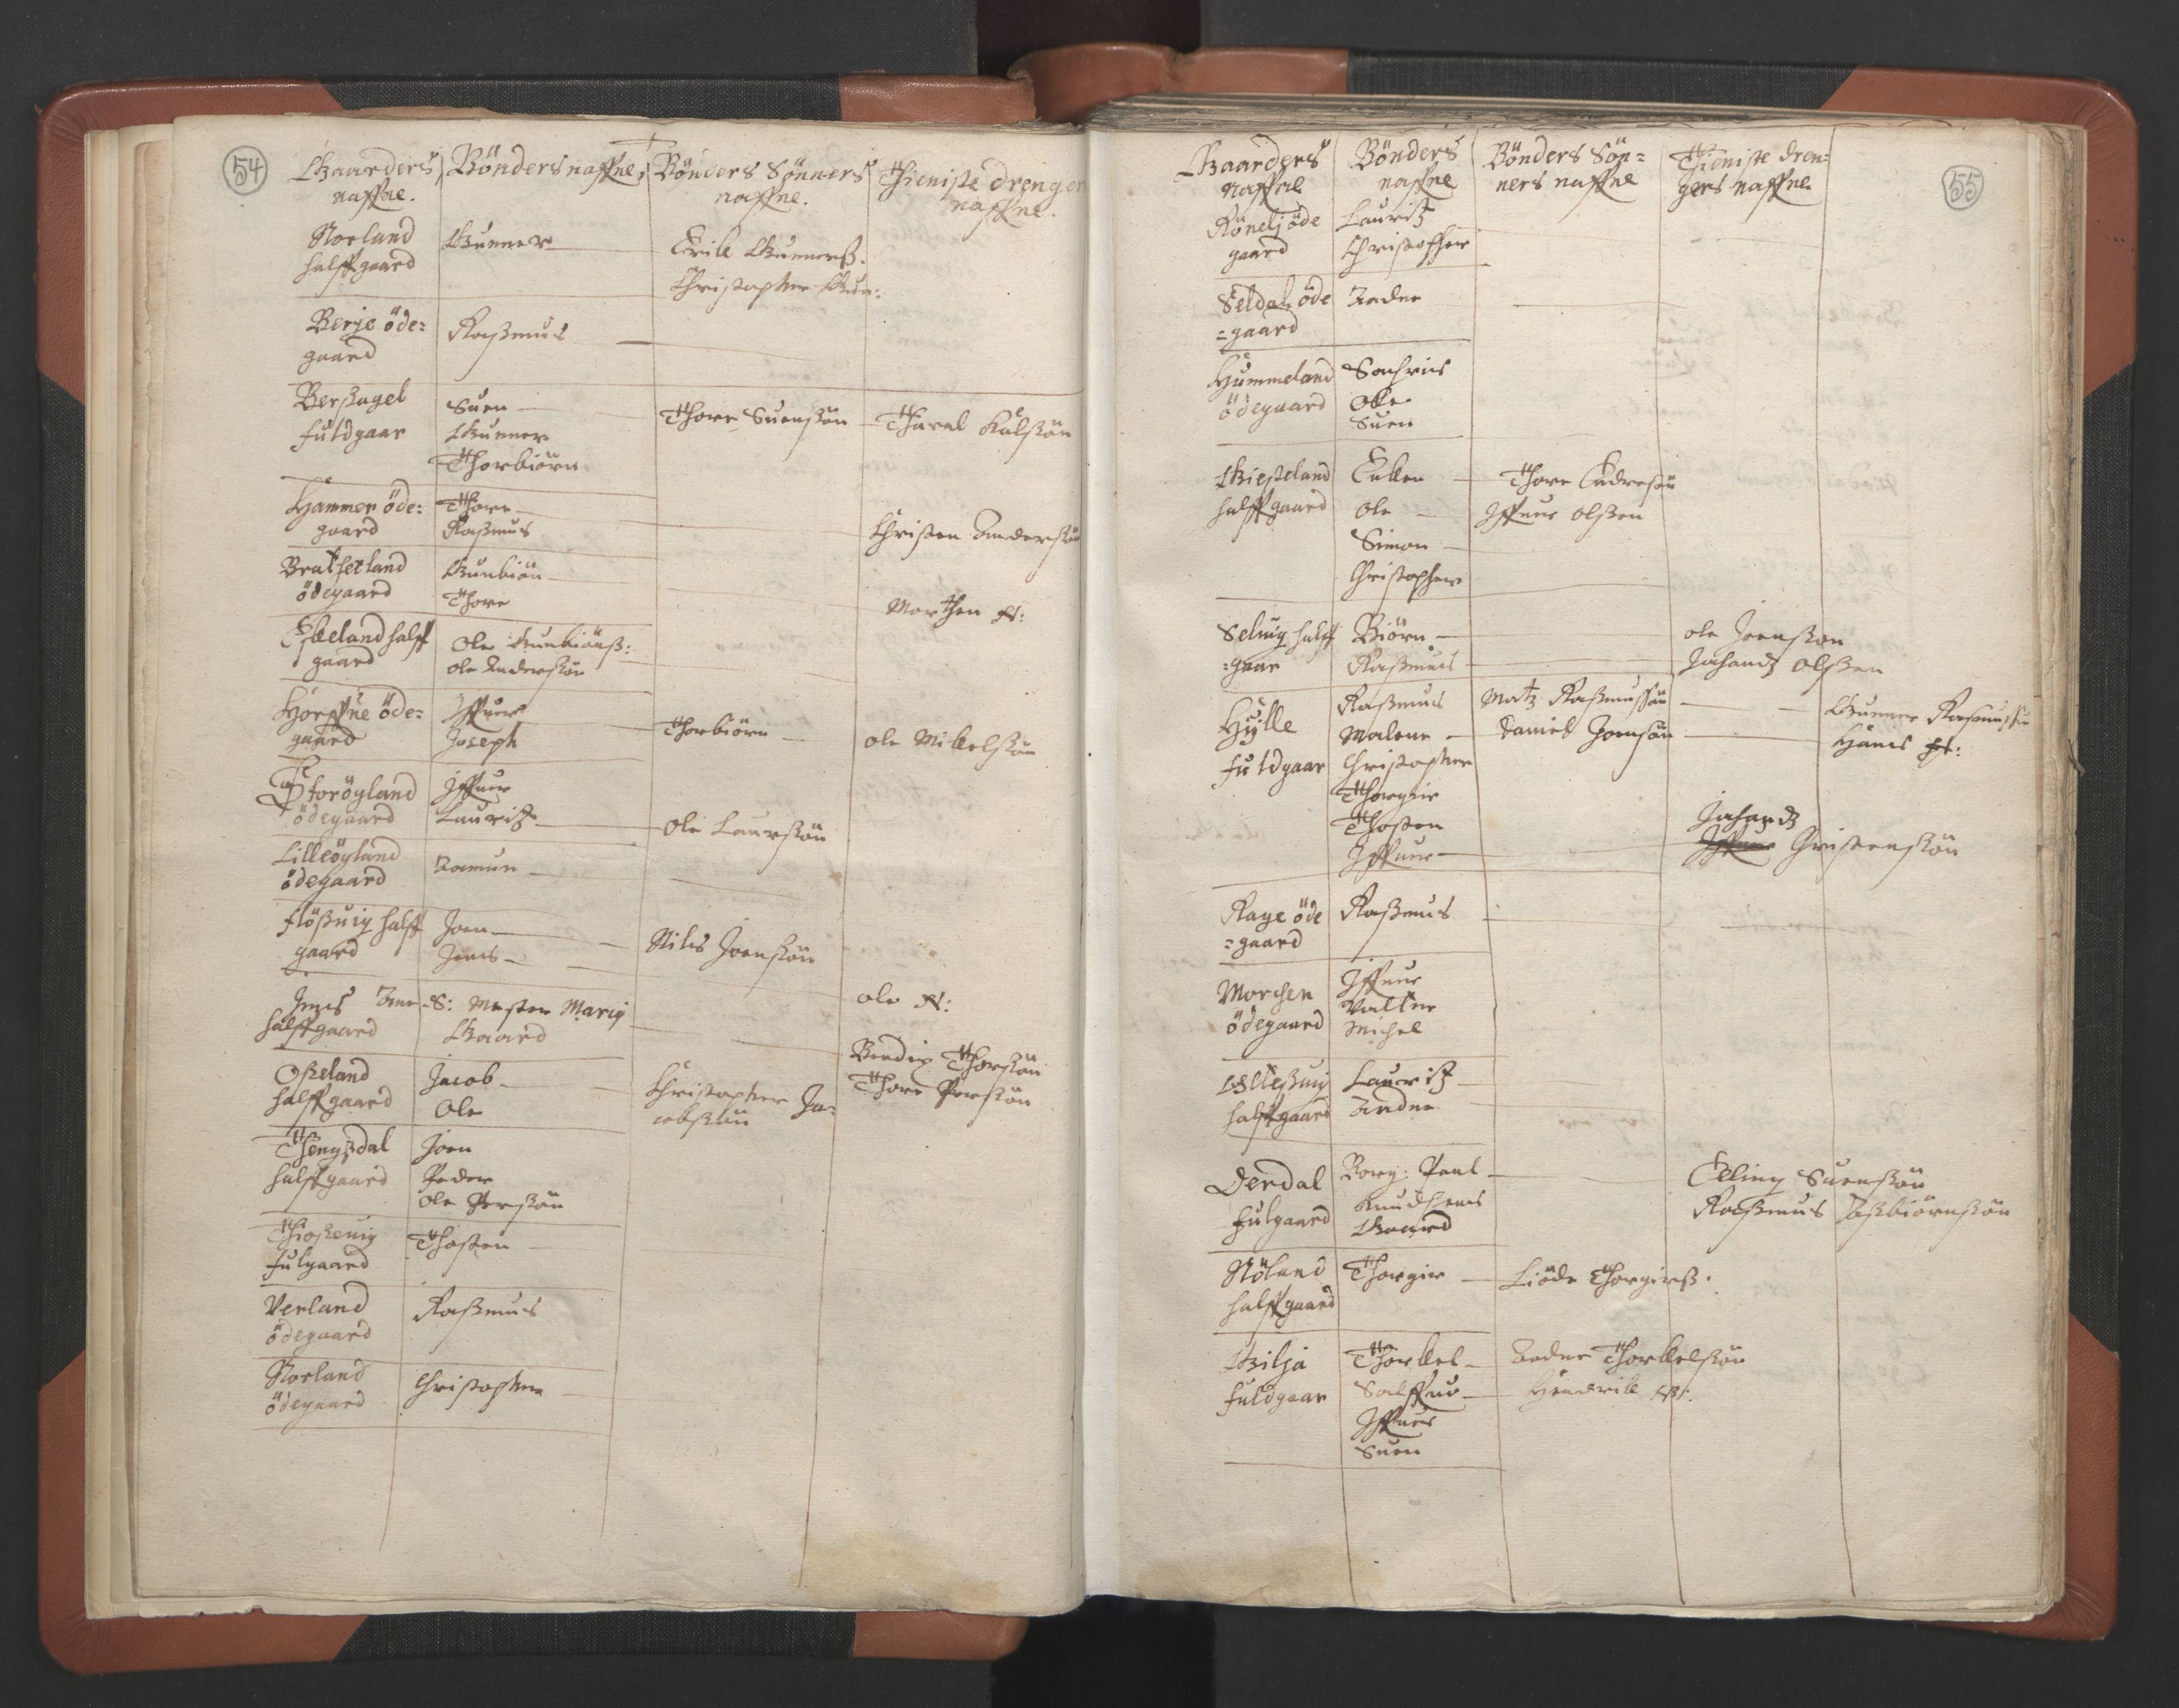 RA, Vicar's Census 1664-1666, no. 18: Stavanger deanery and Karmsund deanery, 1664-1666, p. 54-55